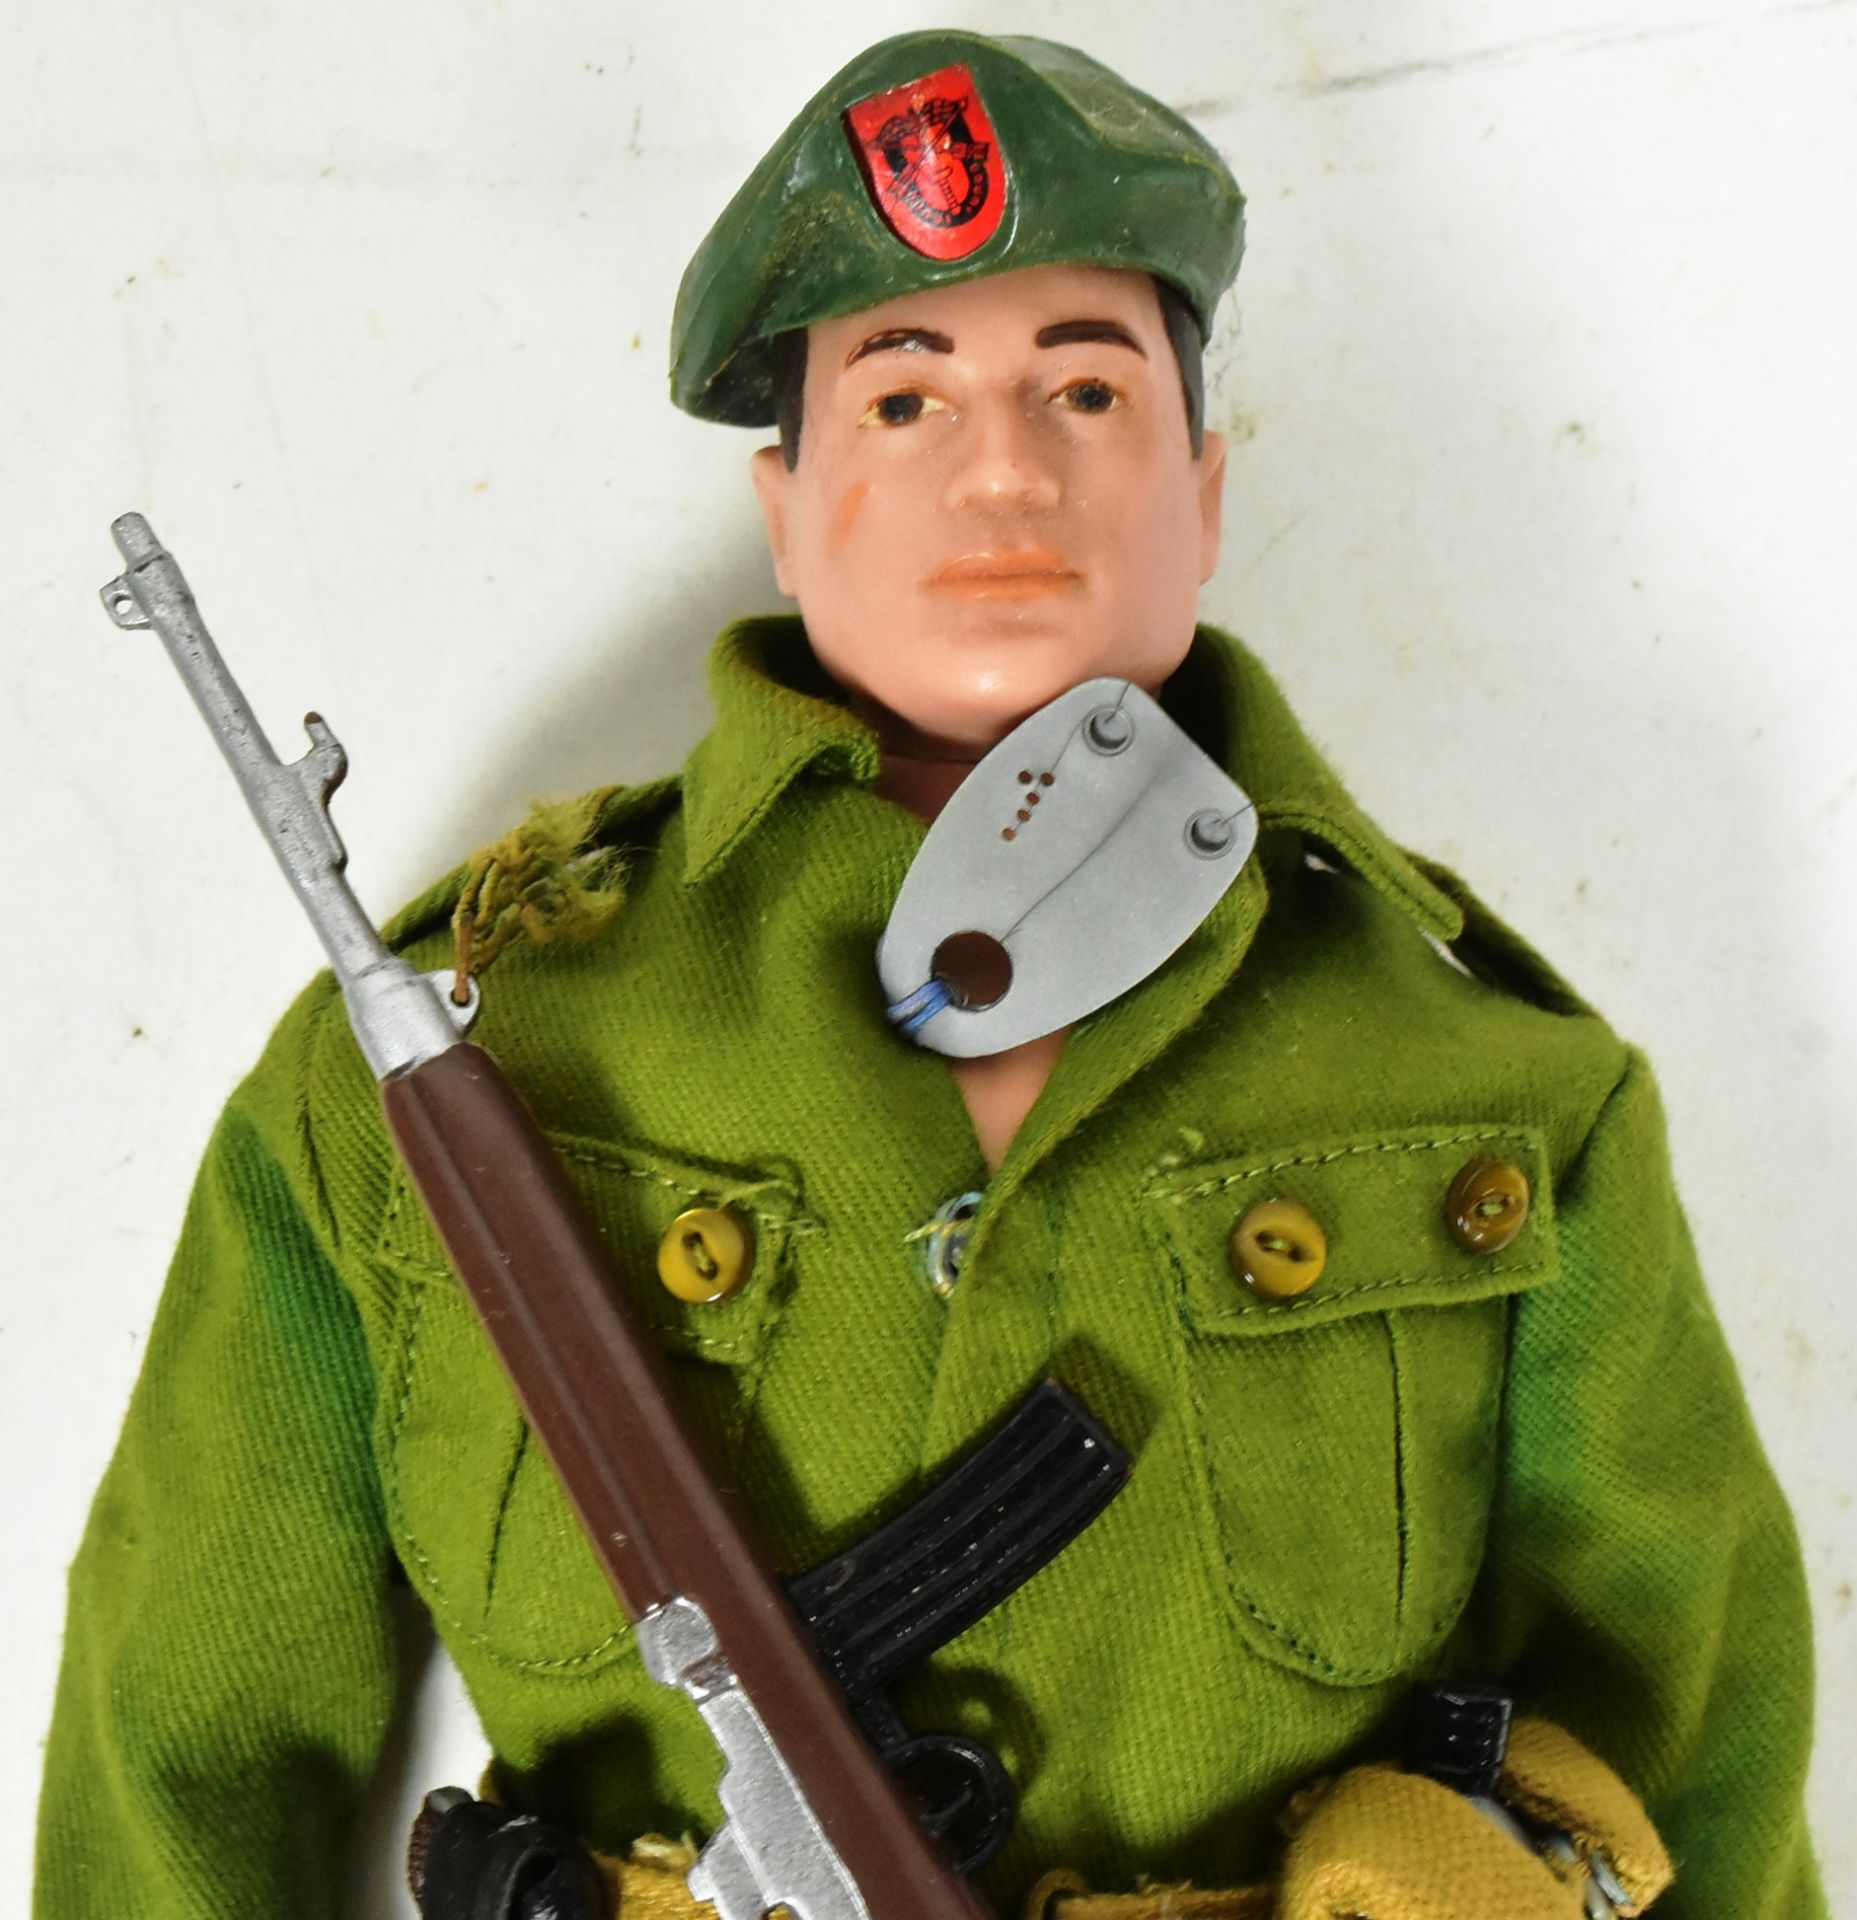 ACTION MAN - VINTAGE PALITOY TALKING COMMANDER ACTION FIGURE - Image 2 of 5